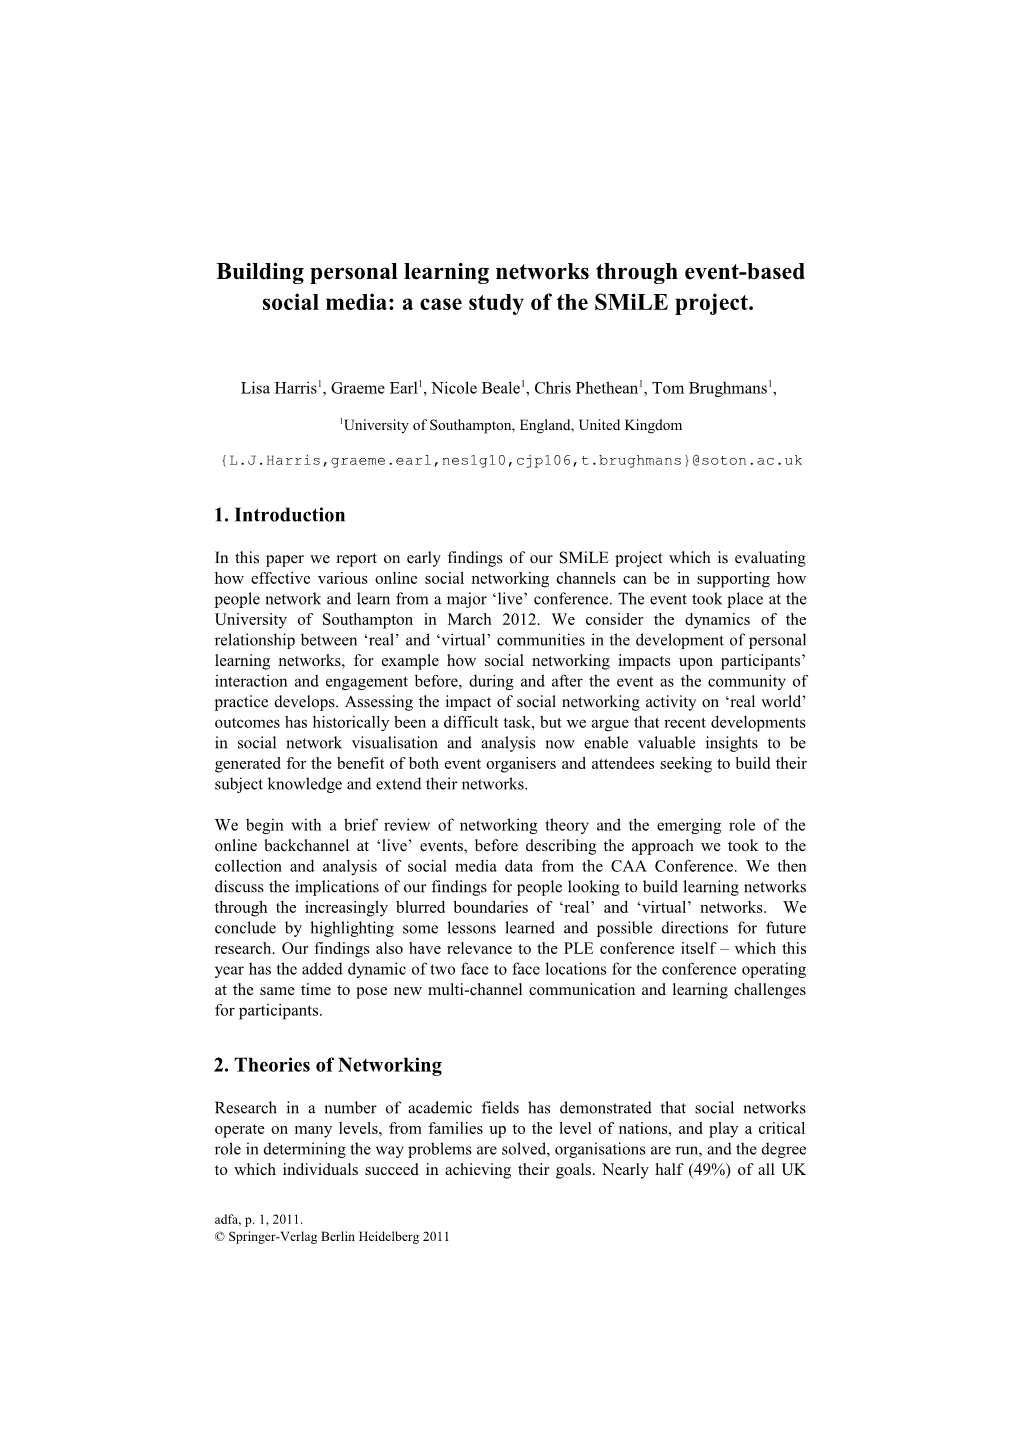 Building Personal Learning Networks Through Event-Based Social Media: a Case Study Of